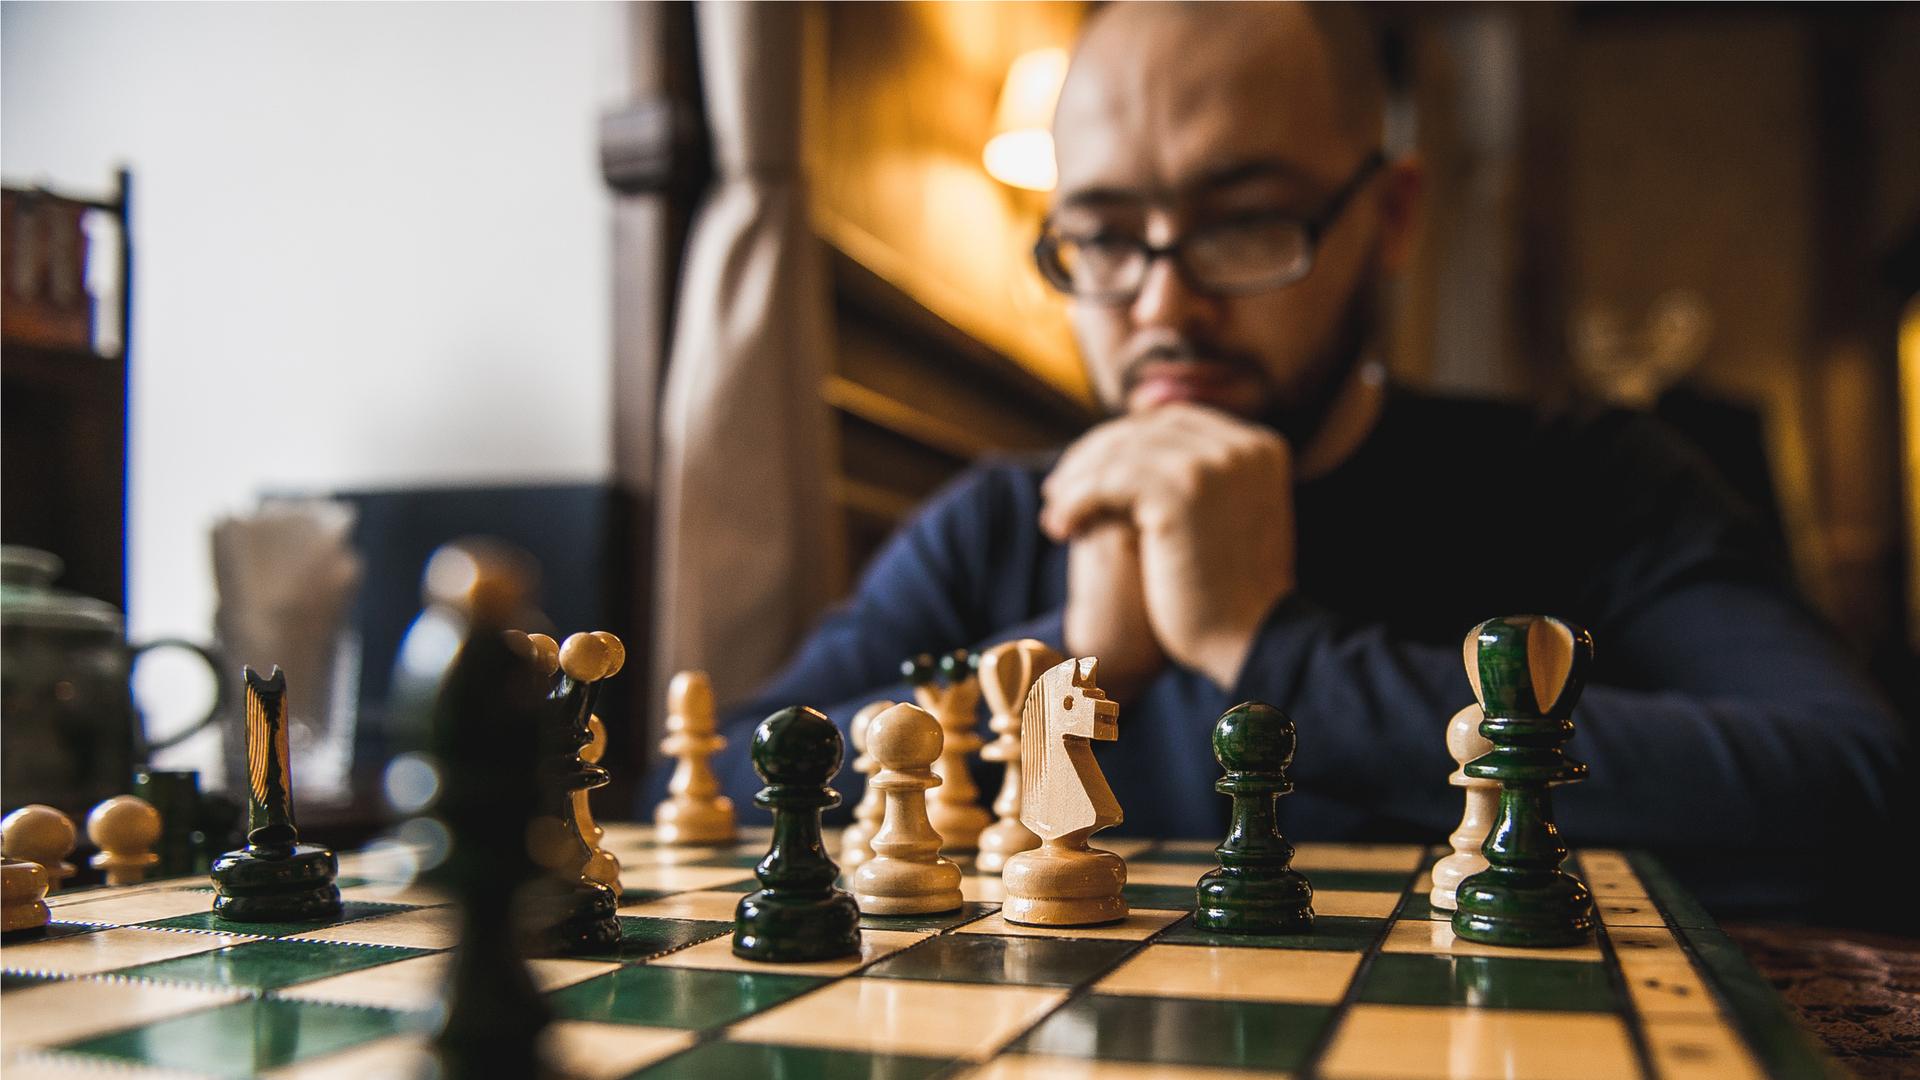 5 Best Tips & Tricks To Become a Better Chess Player - Wisdom Chess Academy